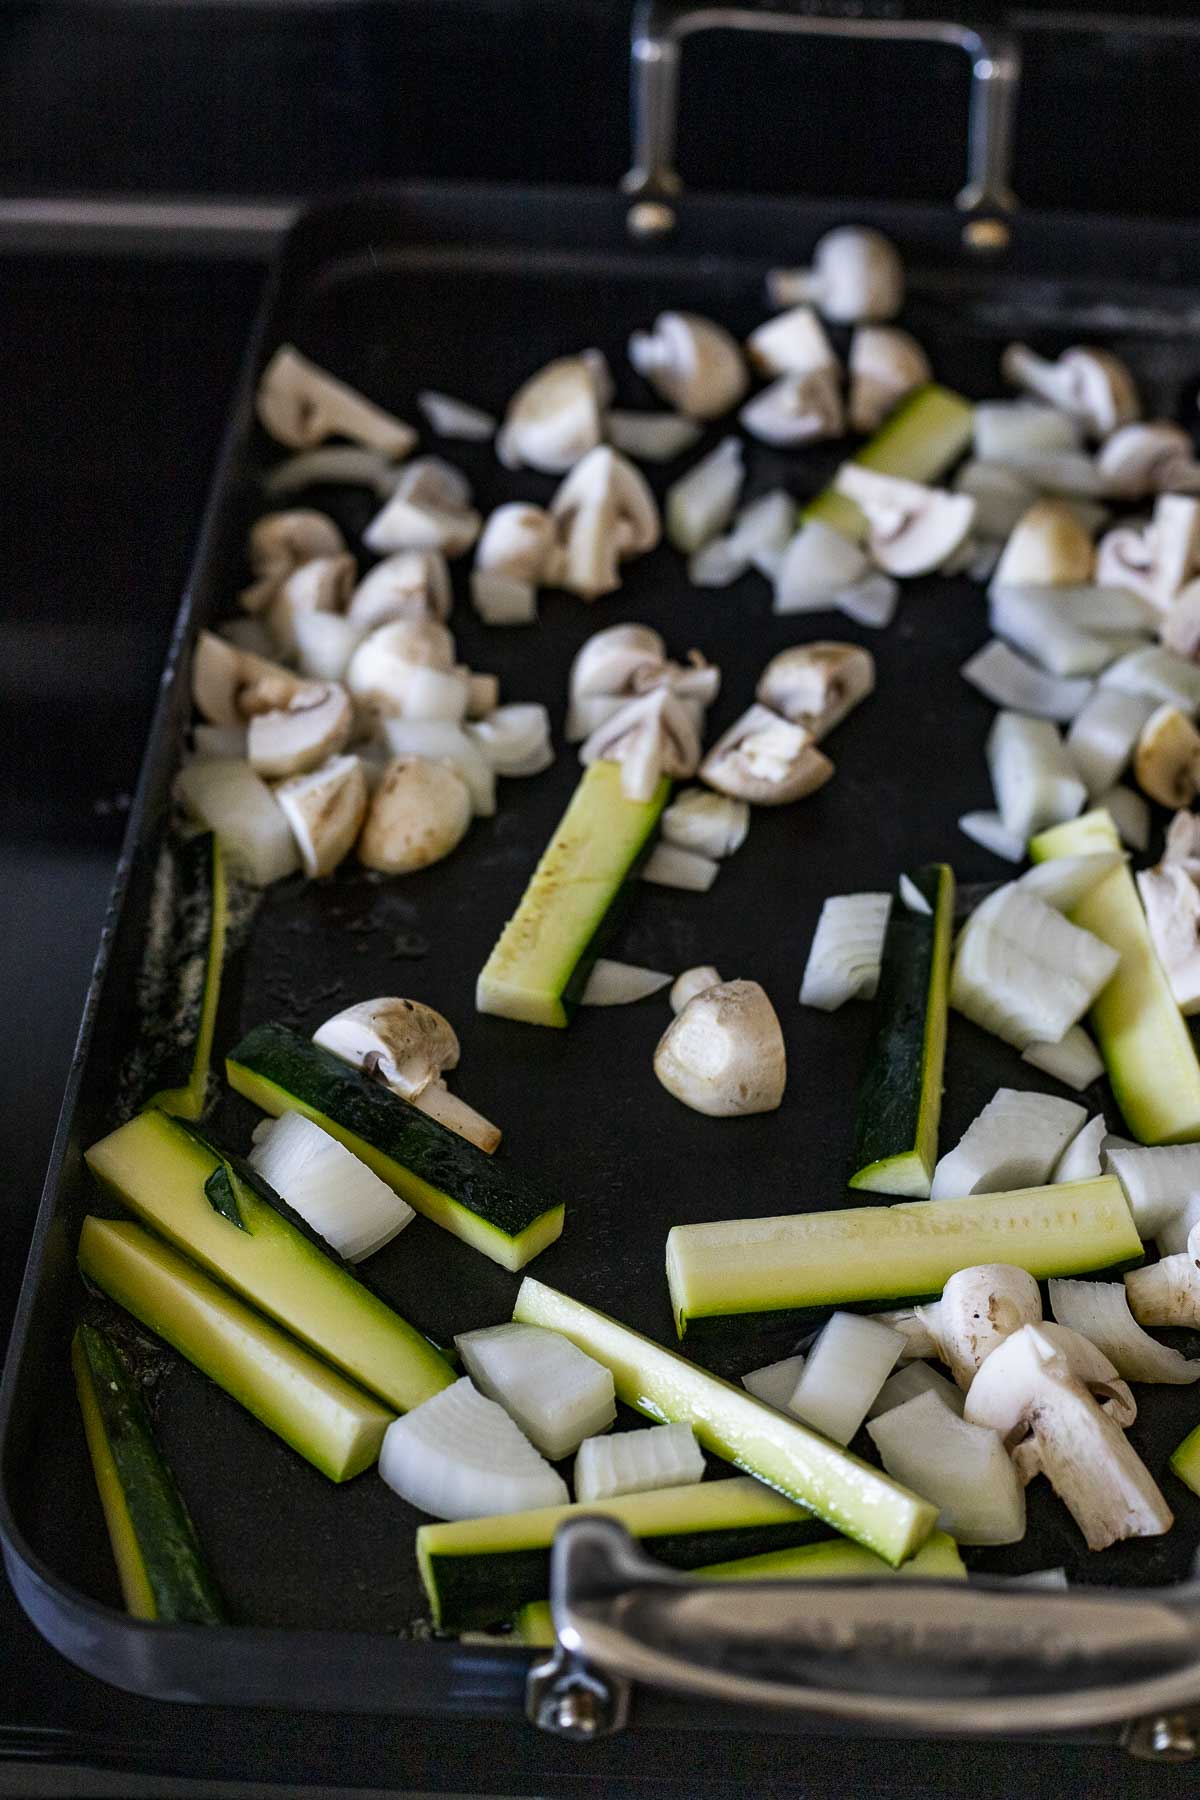 Zucchini, mushrooms and onions cooking on a griddle.